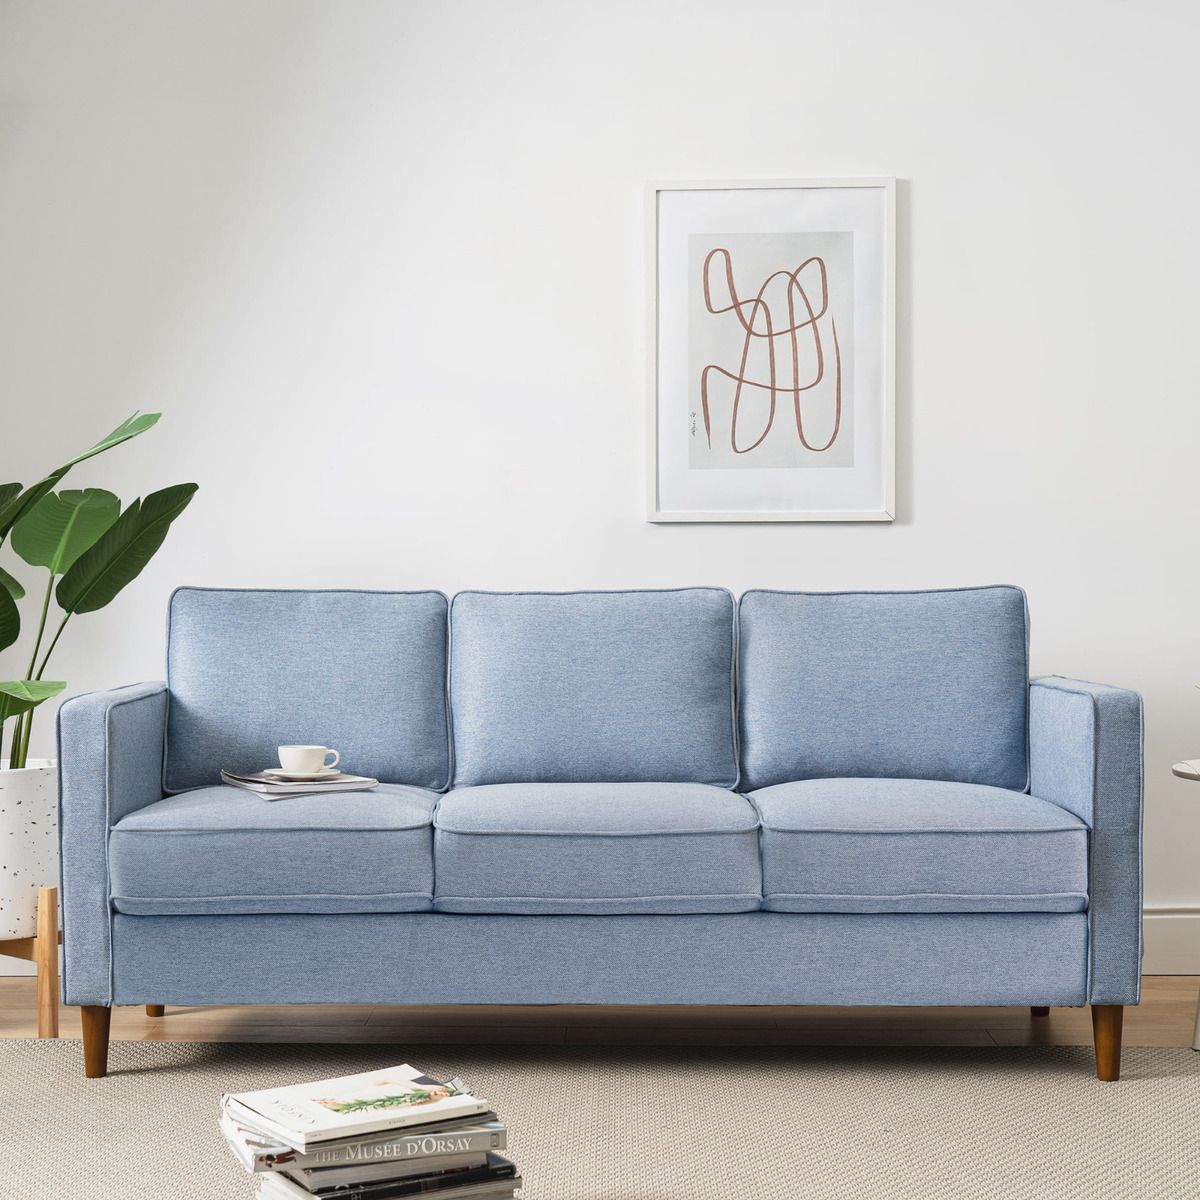 Living Room Sofa Couch Modern 3 Seater Blue Linen Couch With Armrest  Pockets | Ebay For Modern Blue Linen Sofas (View 3 of 15)